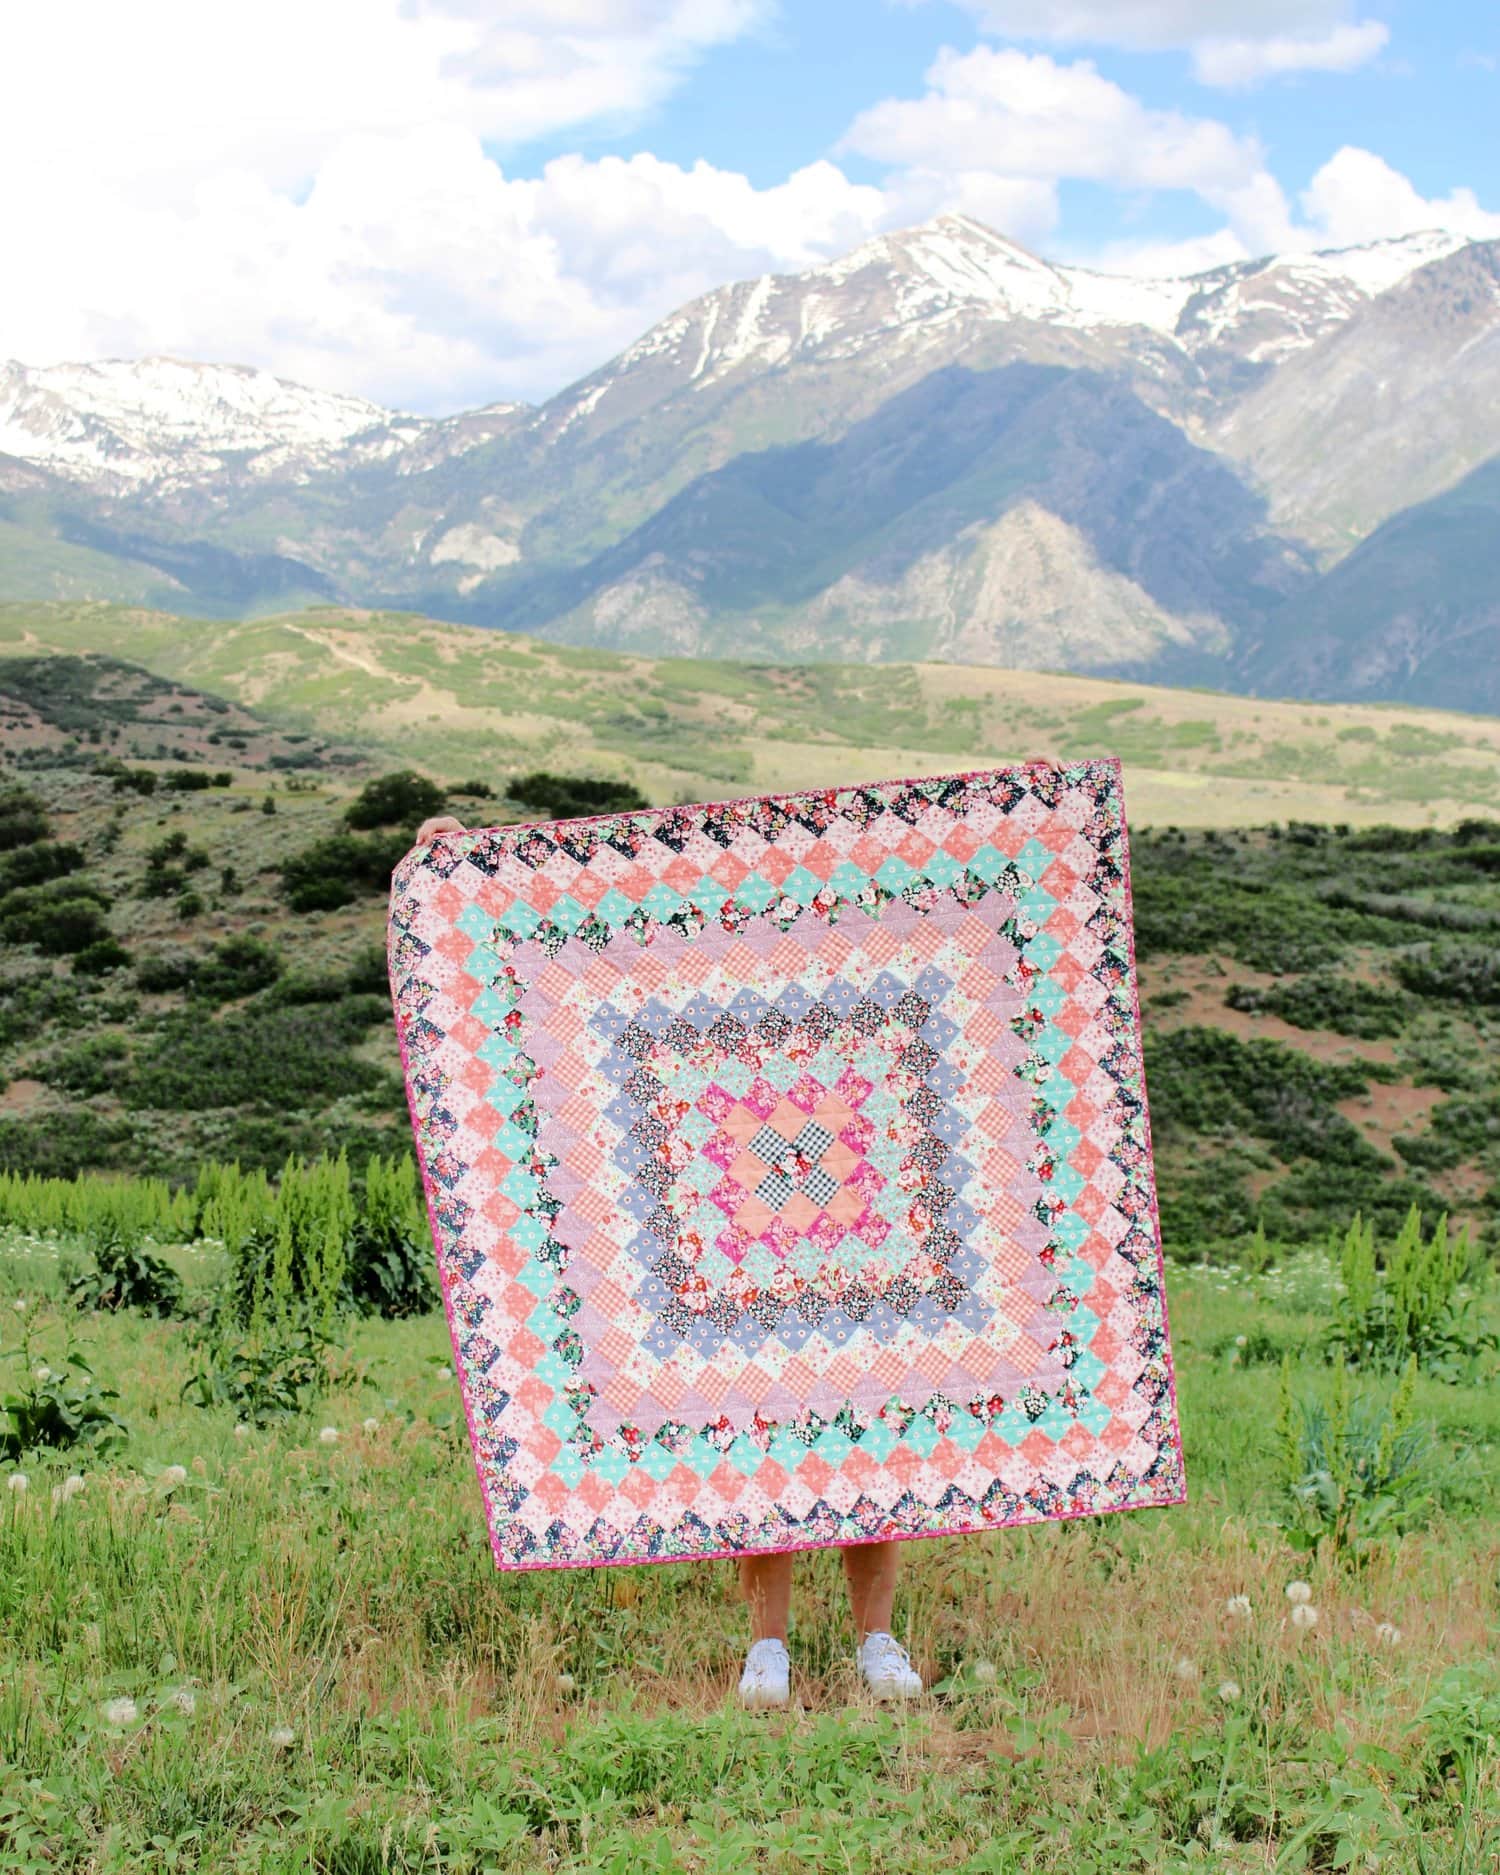 quilt outdoors in mountains